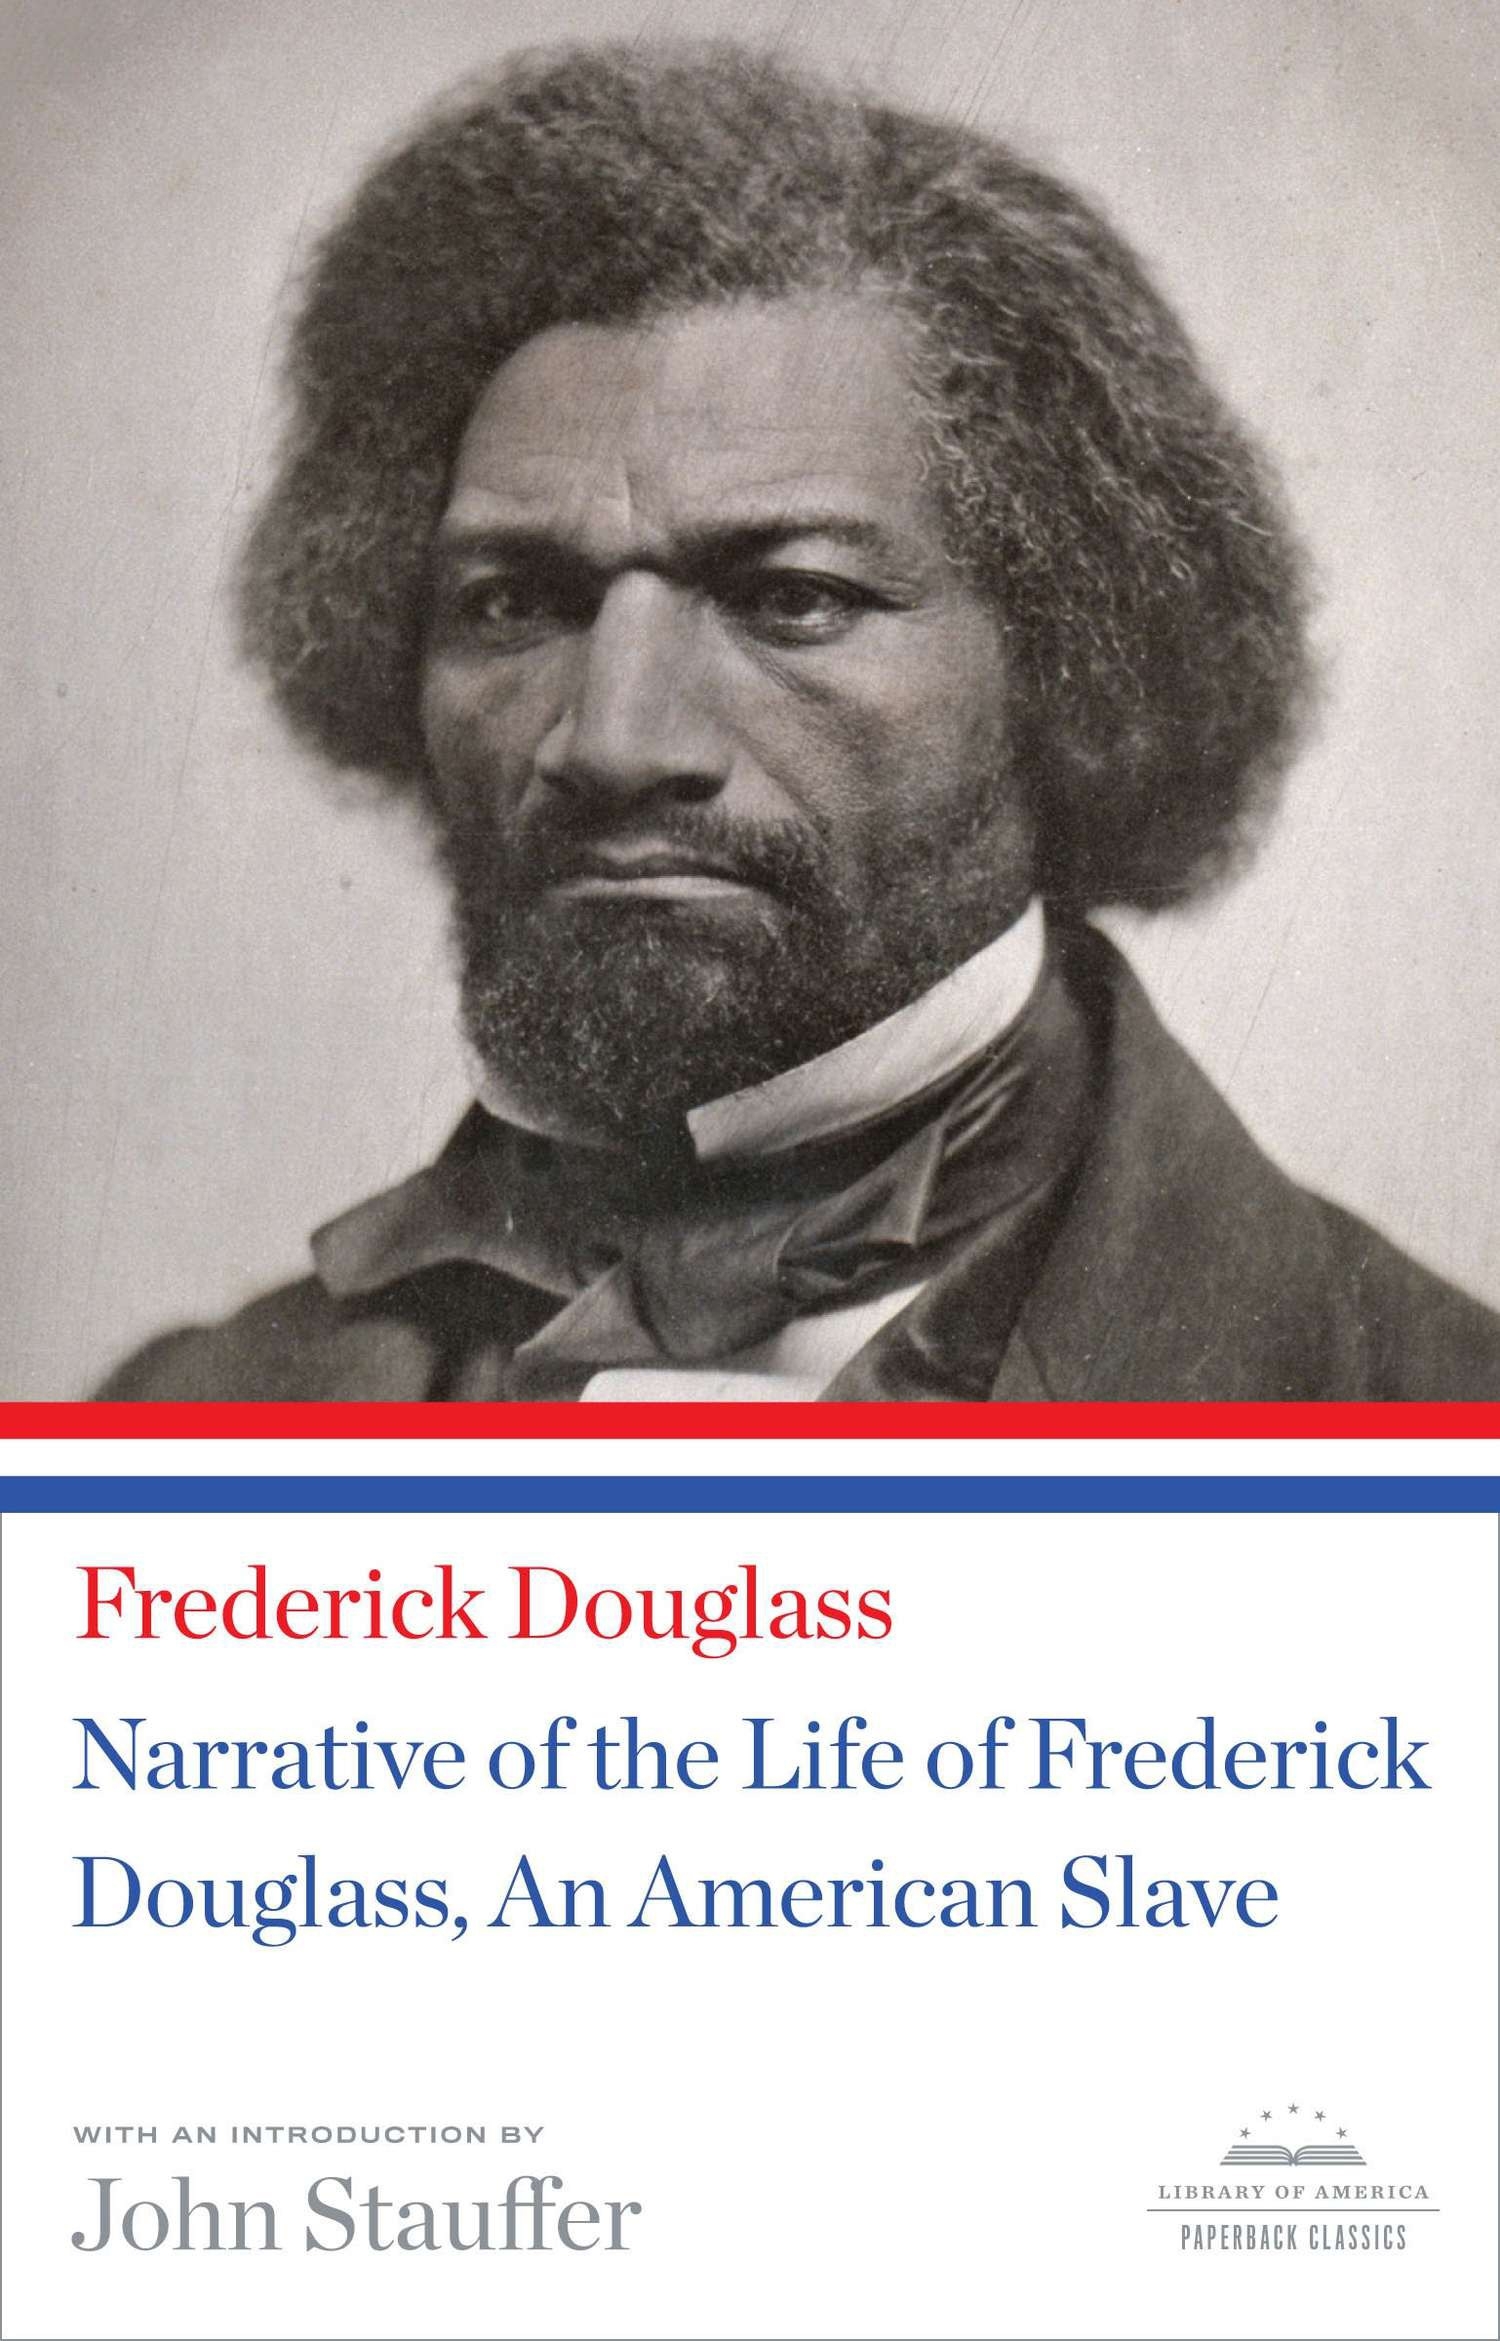 book review narrative of the life of frederick douglass